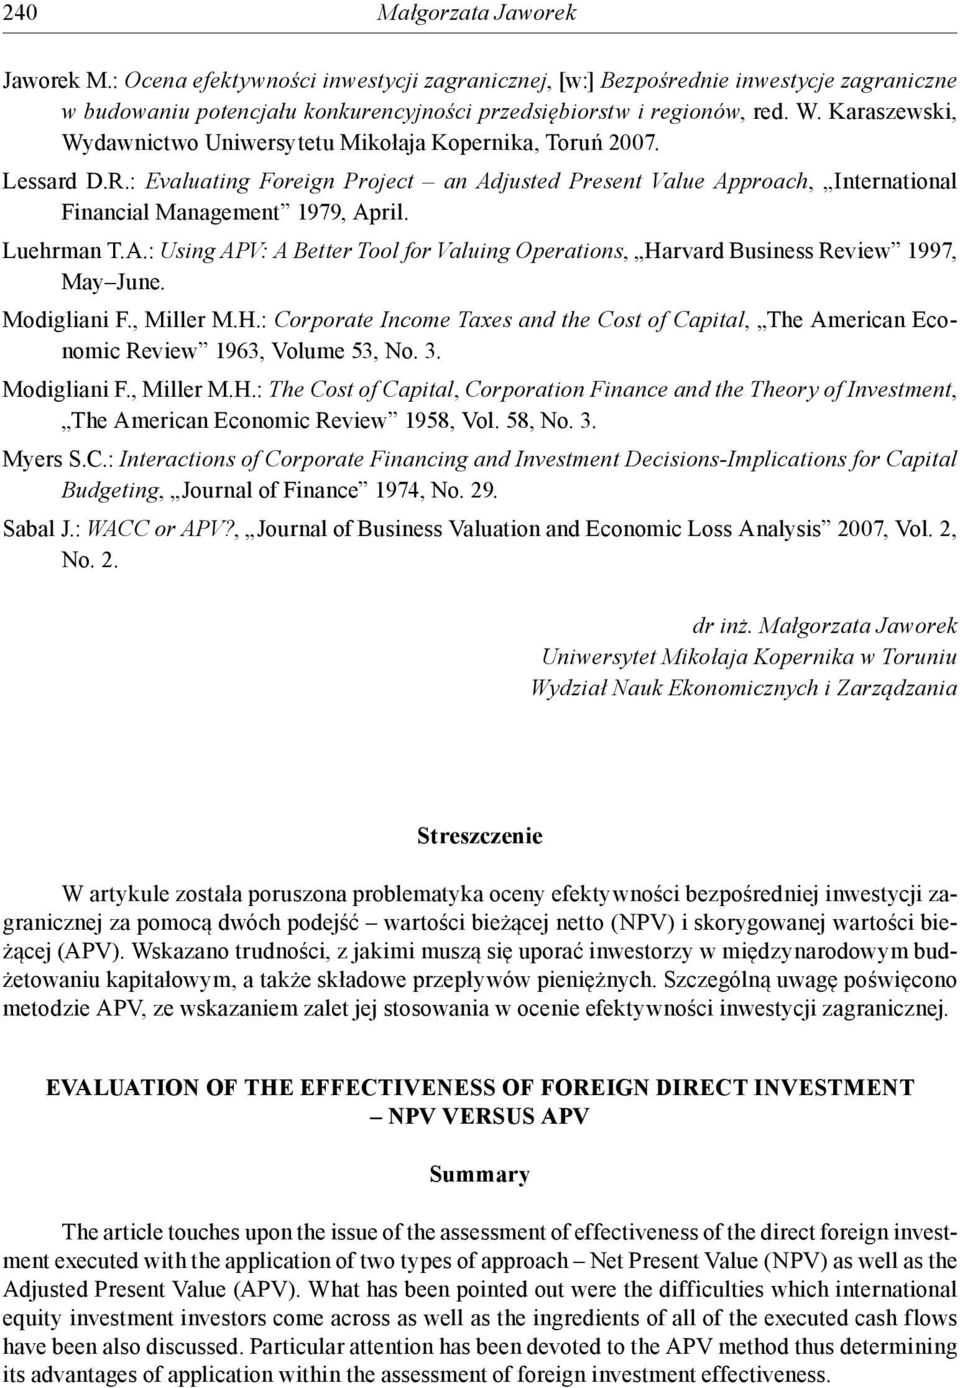 Luehrman T.A.: Using APV: A Better Tool for Valuing Operations, Harvard Business Review 1997, May June. Modigliani F., Miller M.H.: Corporate Income Taxes and the Cost of Capital, The American Economic Review 1963, Volume 53, No.